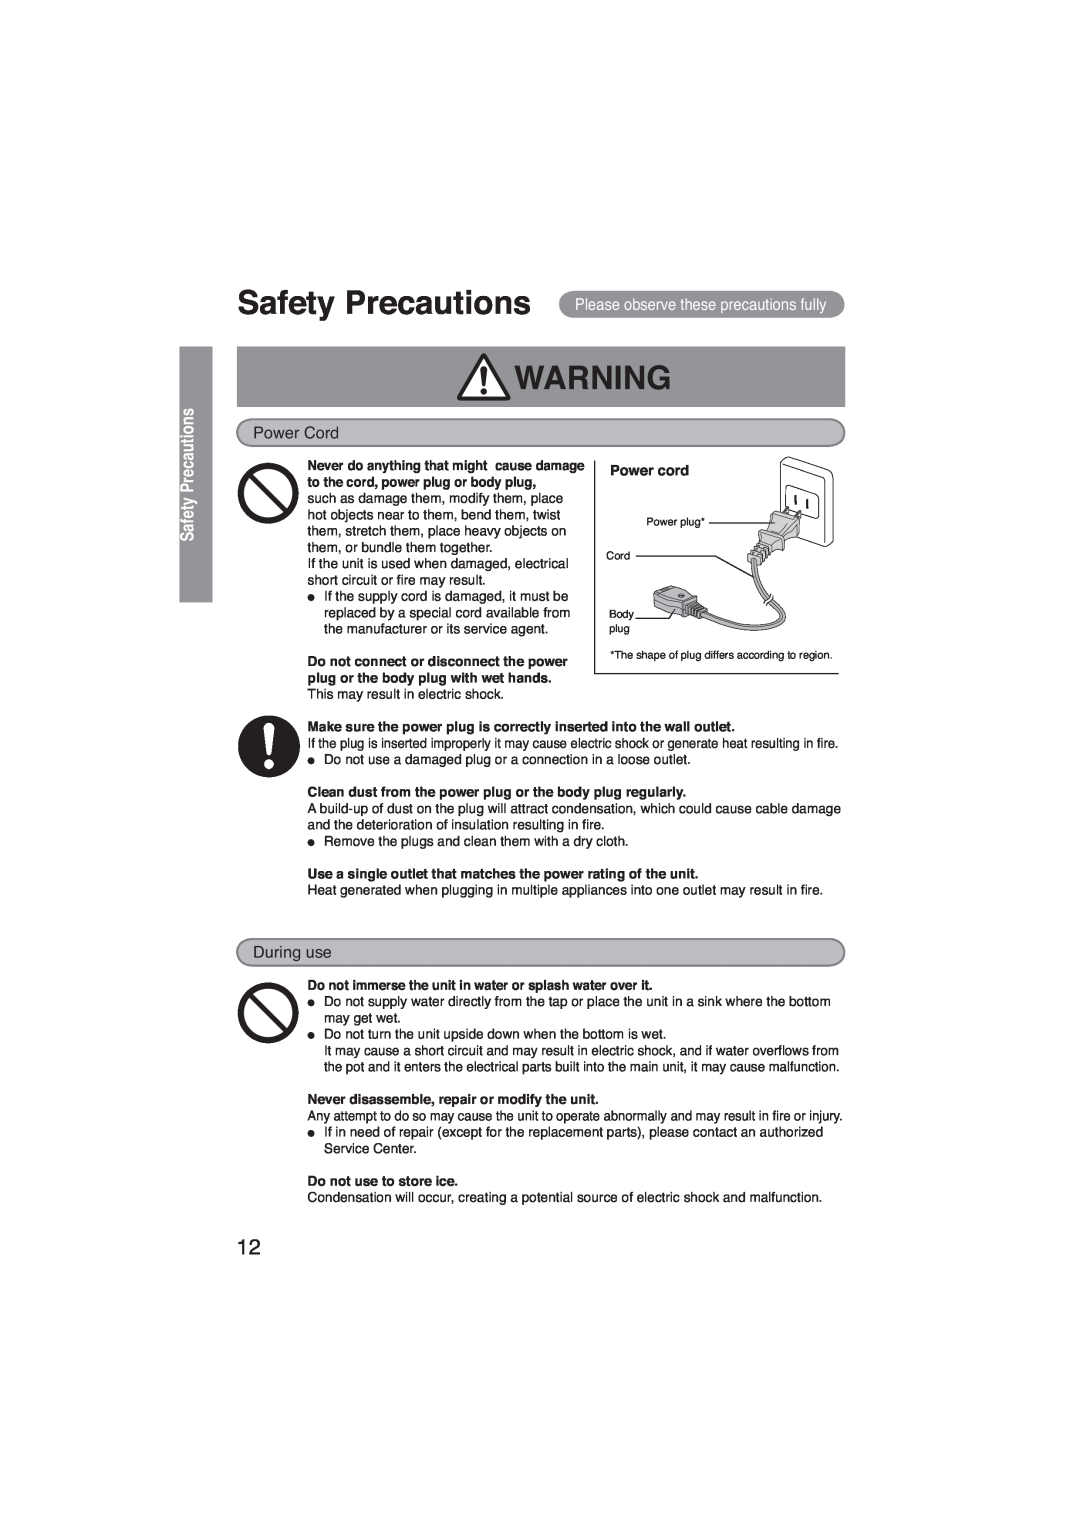 Panasonic NC-EH30P, NC-EH22P Safety Precautions Please observe these precautions fully, Power Cord, During use, Power cord 